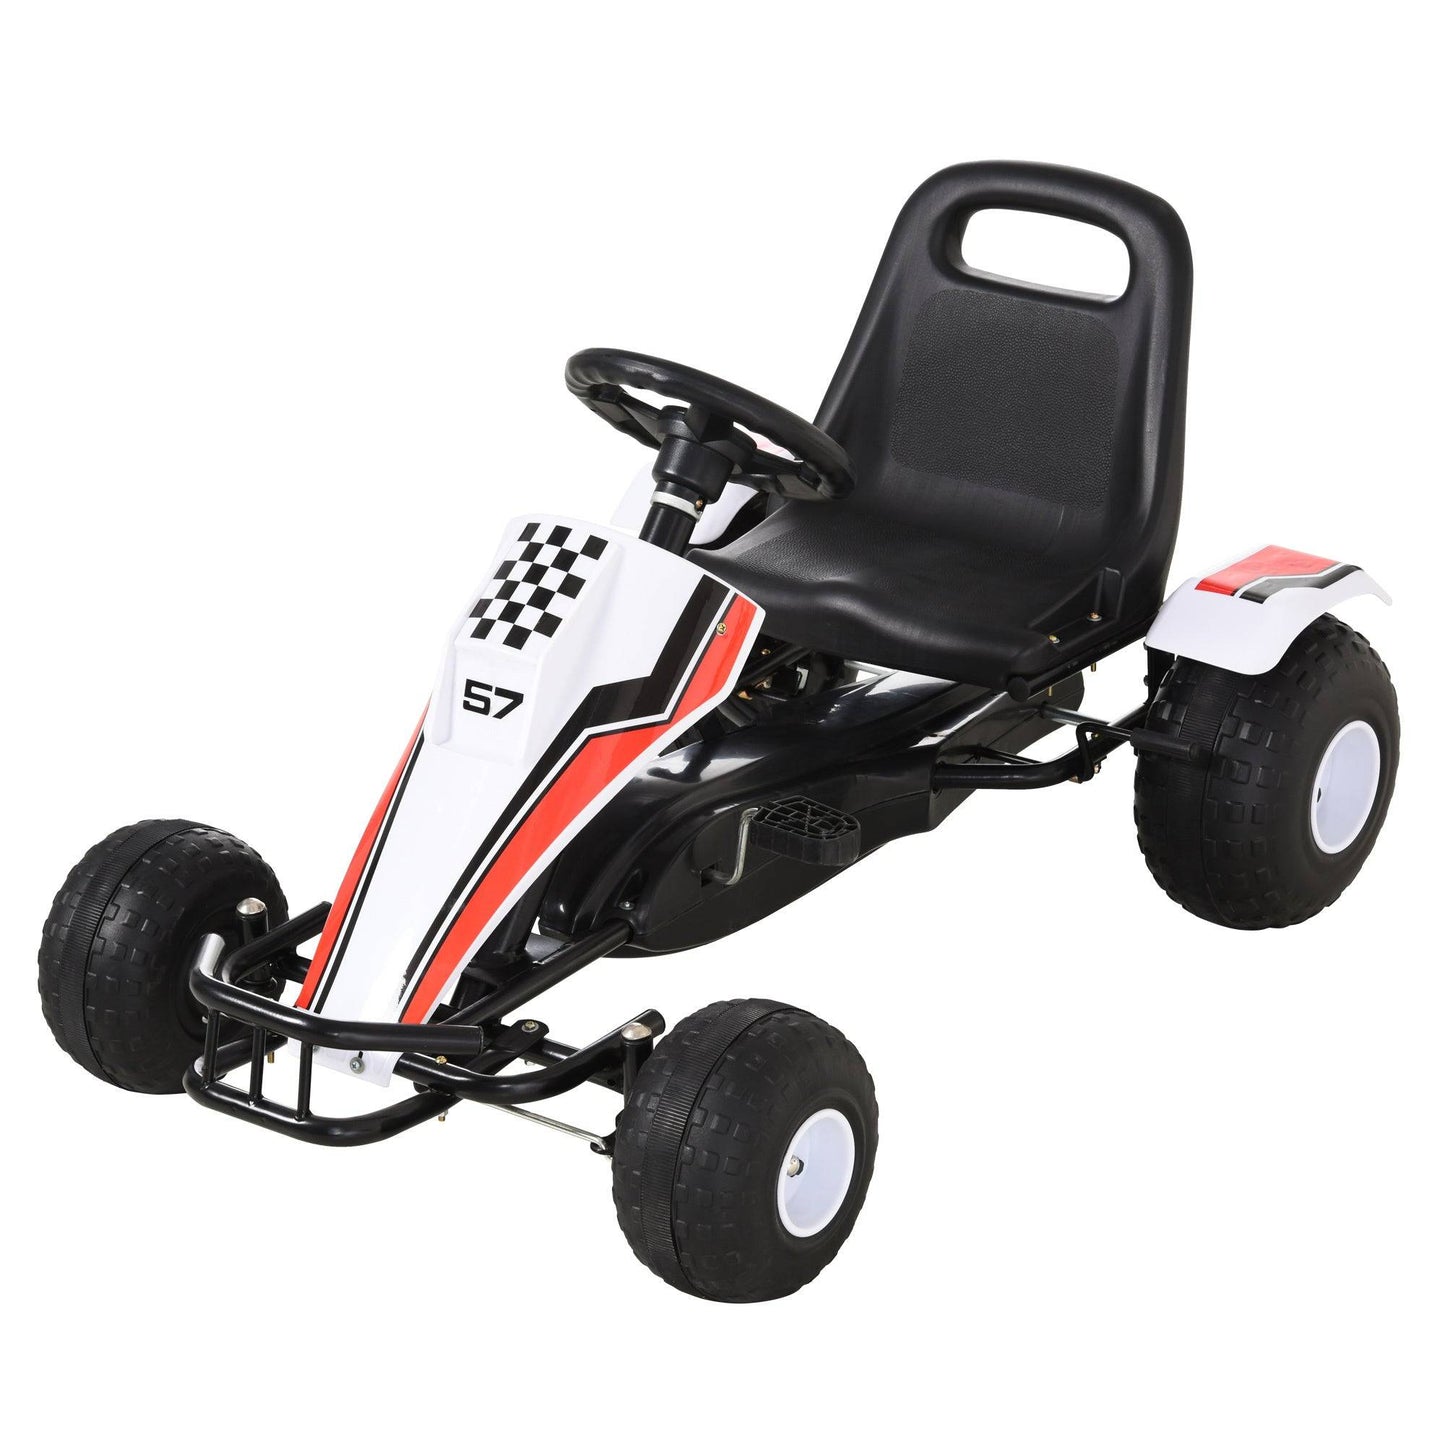 Pedal Go Kart Children Ride on Car Racing Style with Adjustable Seat, Plastic Wheels, Handbrake and Shift Lever, White